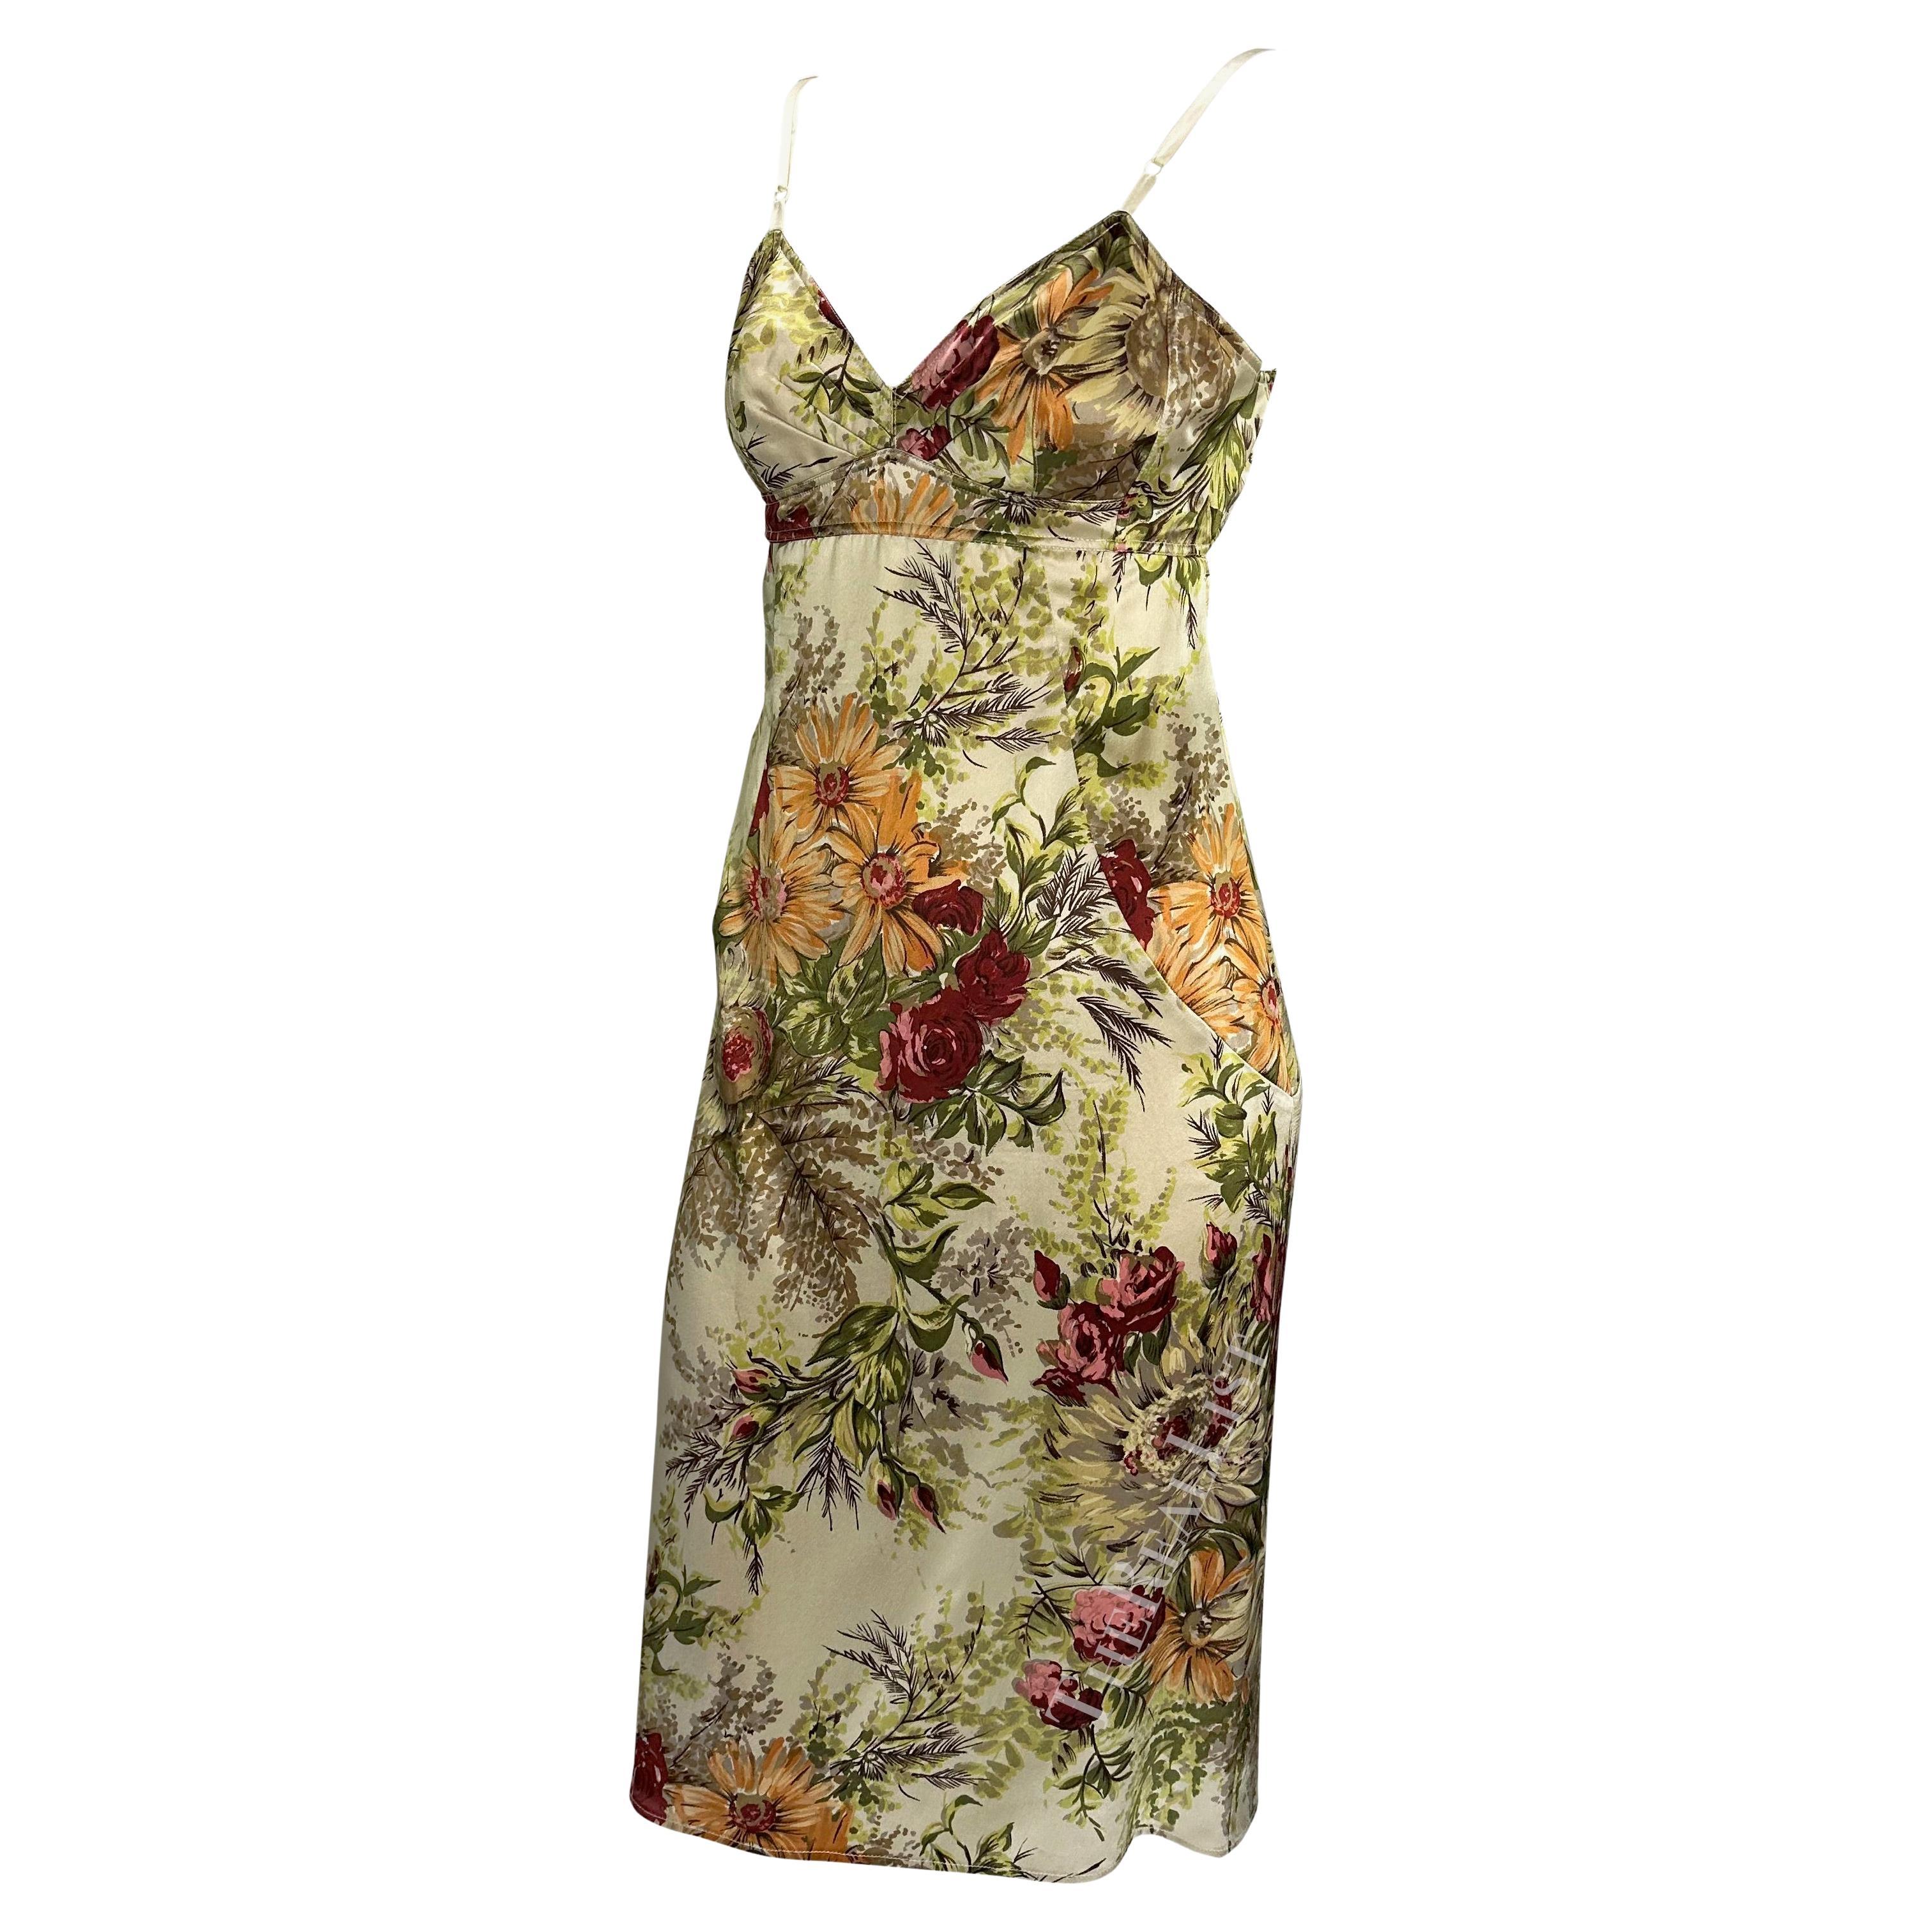 Presenting a stunning silk floral Dolce & Gabbana dress. From the Spring/Summer 1997 collection, this dress features a bold floral pattern and semi-backless design. Add this fabulous vintage Dolce and Gabbana dress to your collection!

Approximate